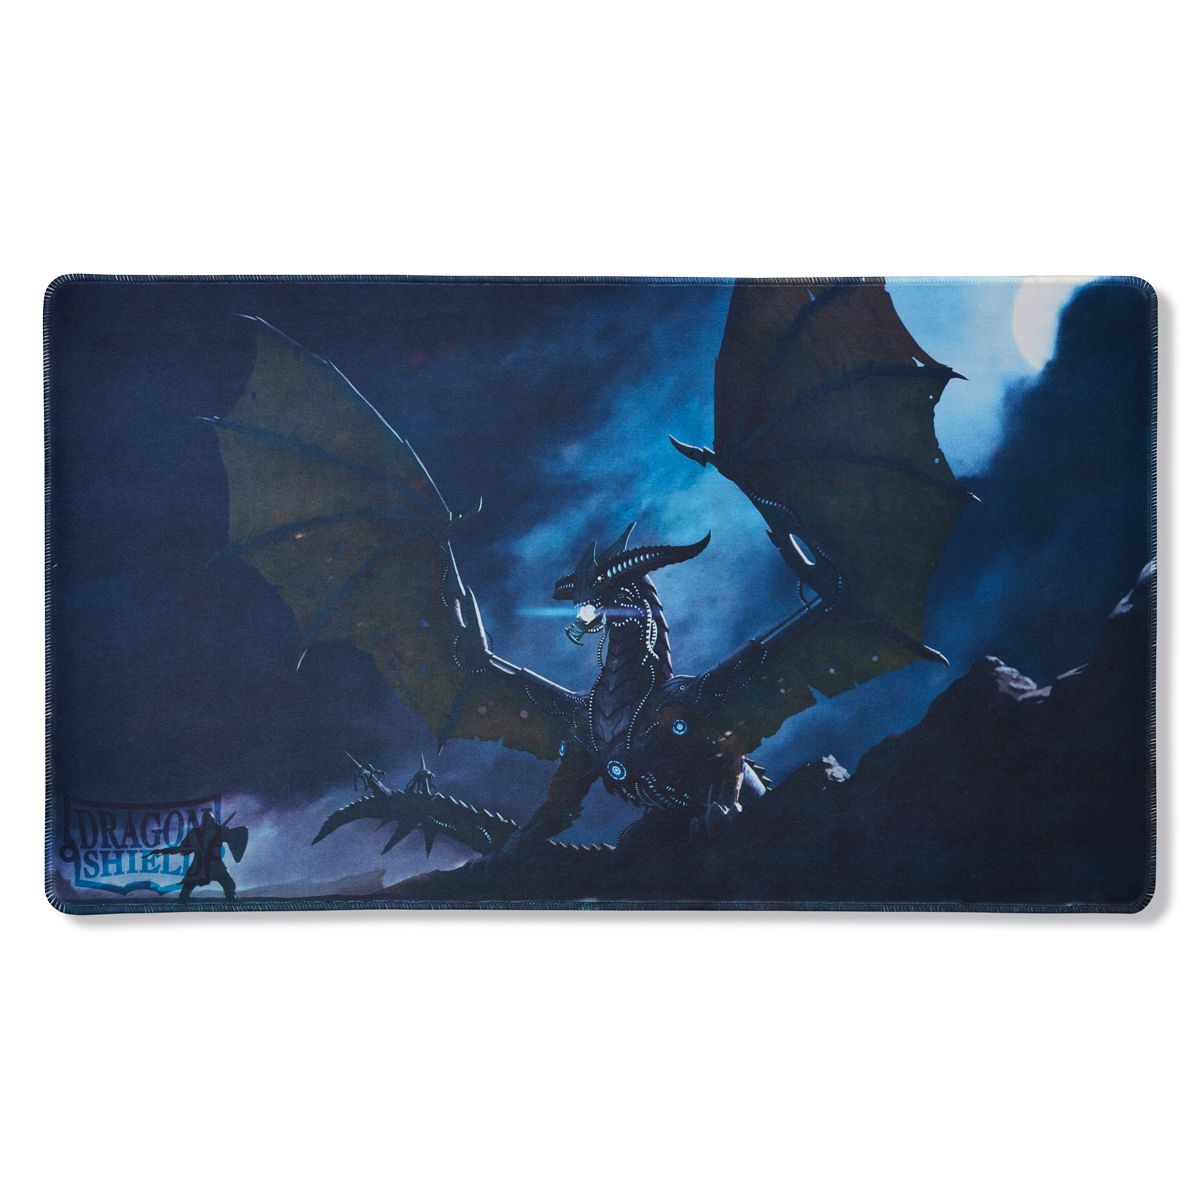 Playmat - Dragon Shield - Case and Coin - Jet Bodom